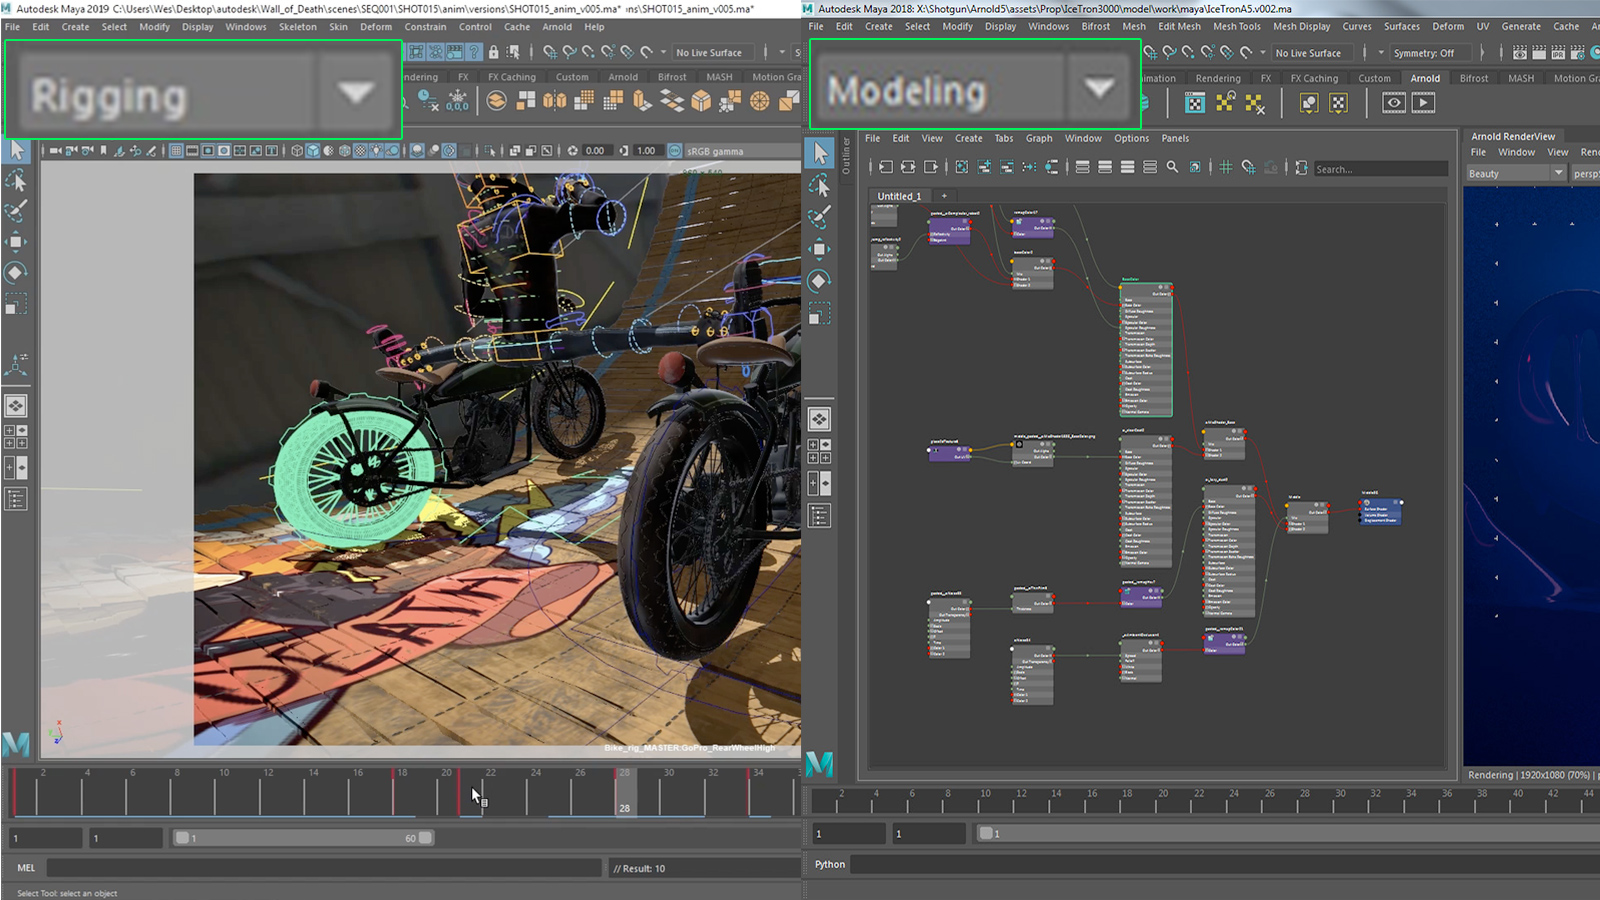 How Autodesk Maya uses view modeling to represent different mental models. On the left is the interface for rigging 3D models. On the right, the interface for modeling.